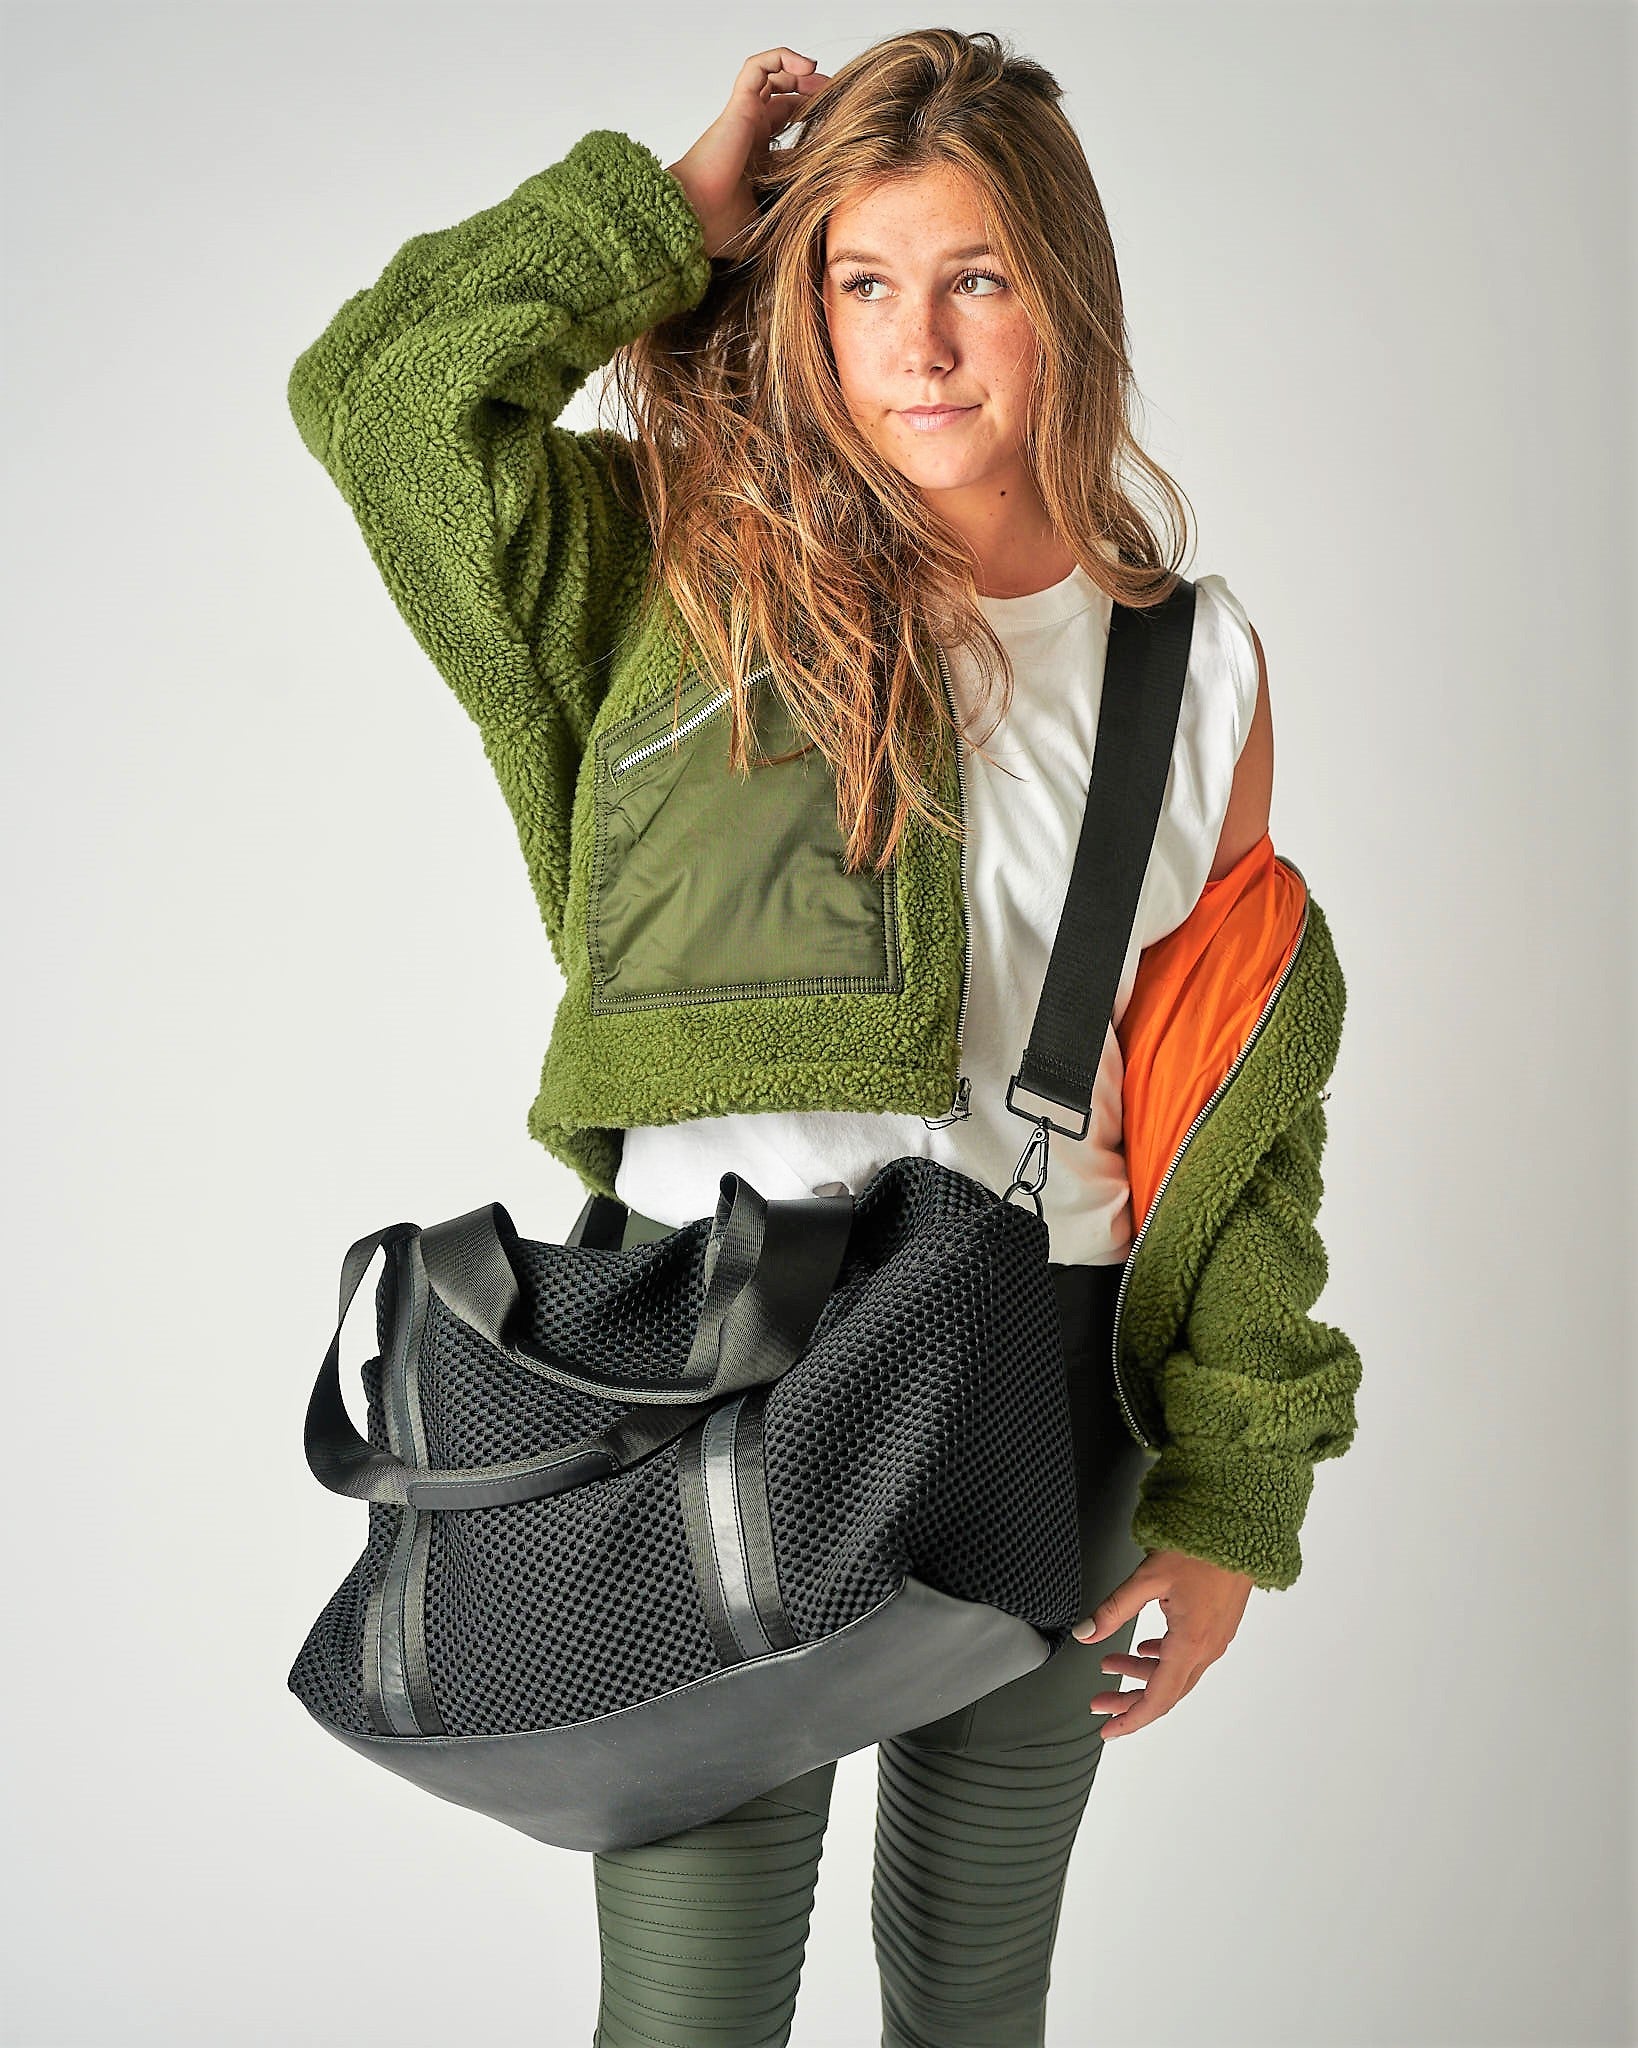 Person wearing the Anya & Niki Stanton Bag - a black mesh duffel bag with leather trim details and black glossy liner.